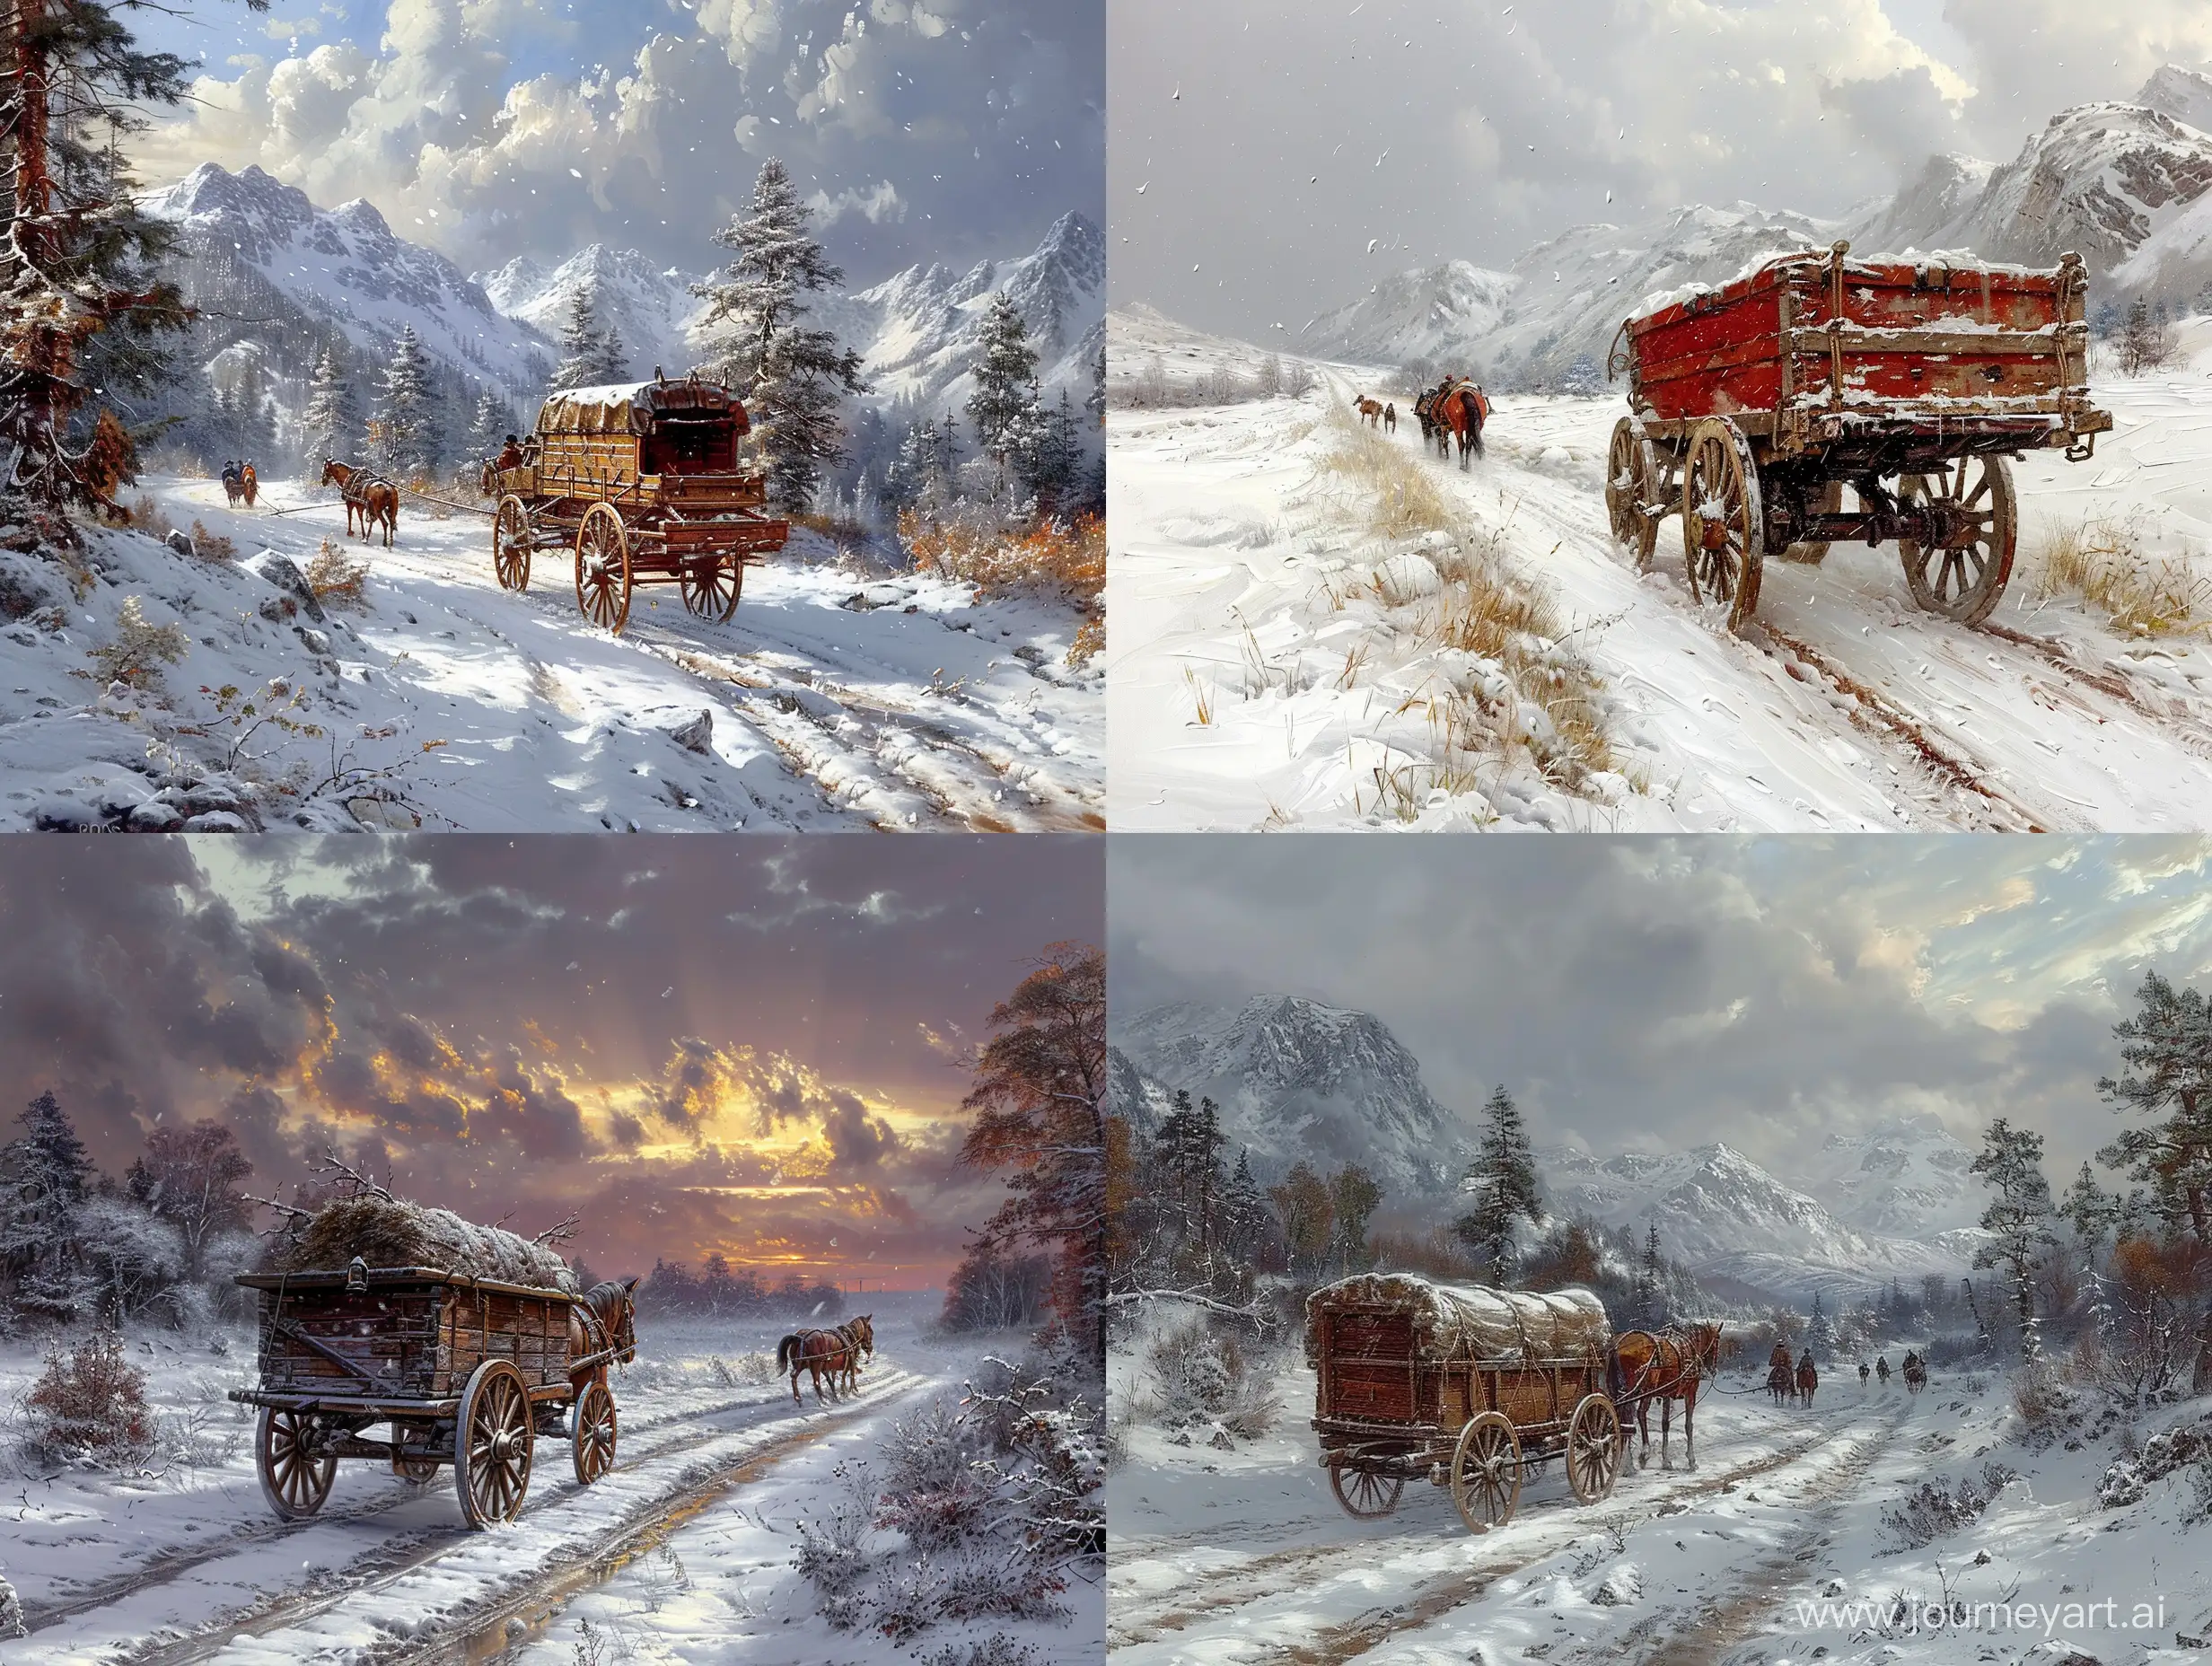 Realistic-Winter-Landscape-Painting-People-and-Horse-with-Wagon-in-Snowy-Western-Setting